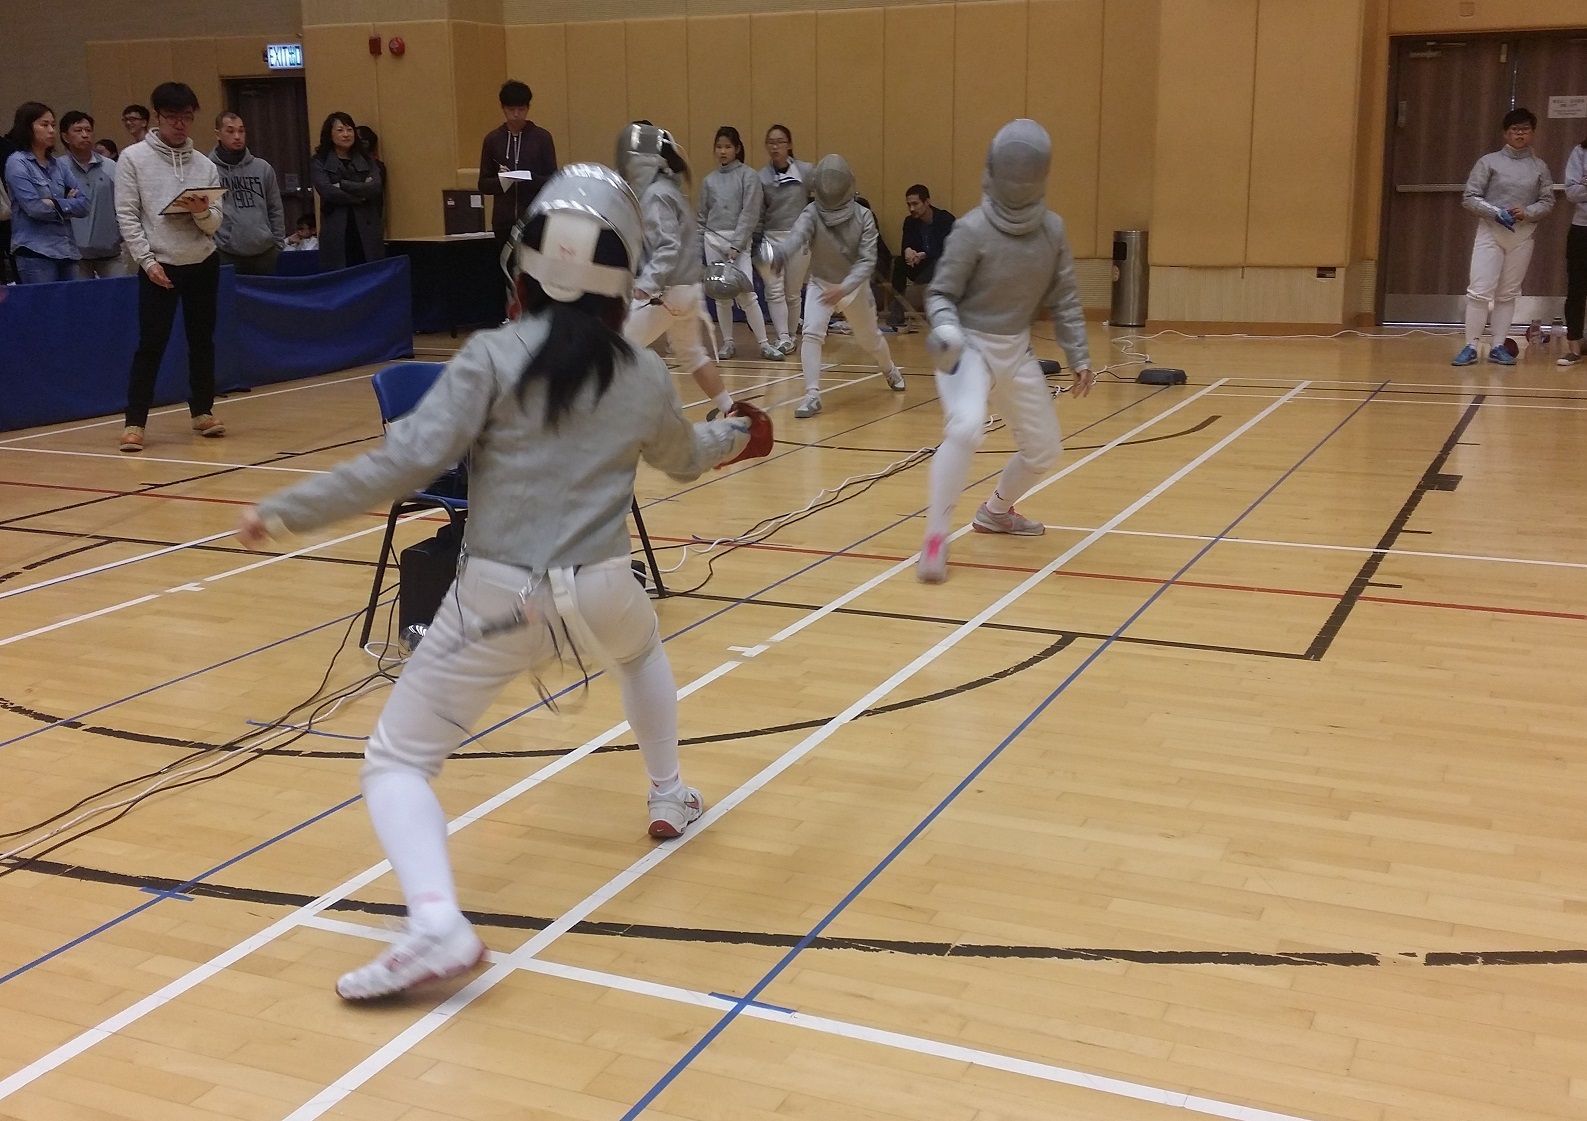 Good news from SPKC fencers!